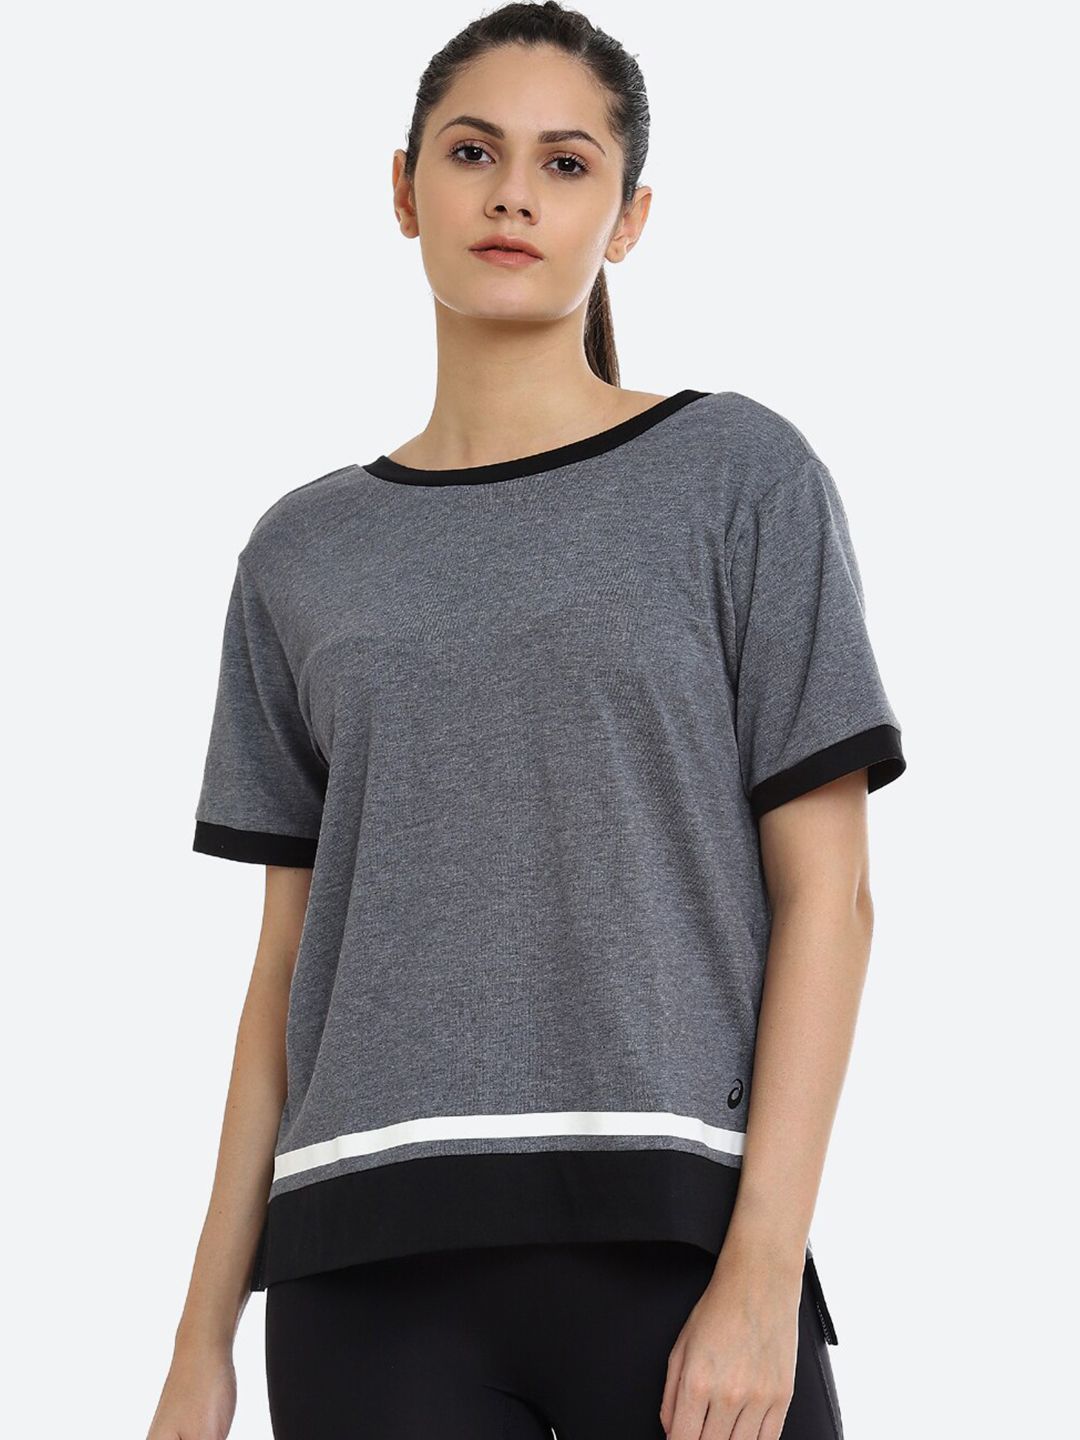 ASICS Women Grey W COLOR BLOCK SS Training T-shirt Price in India